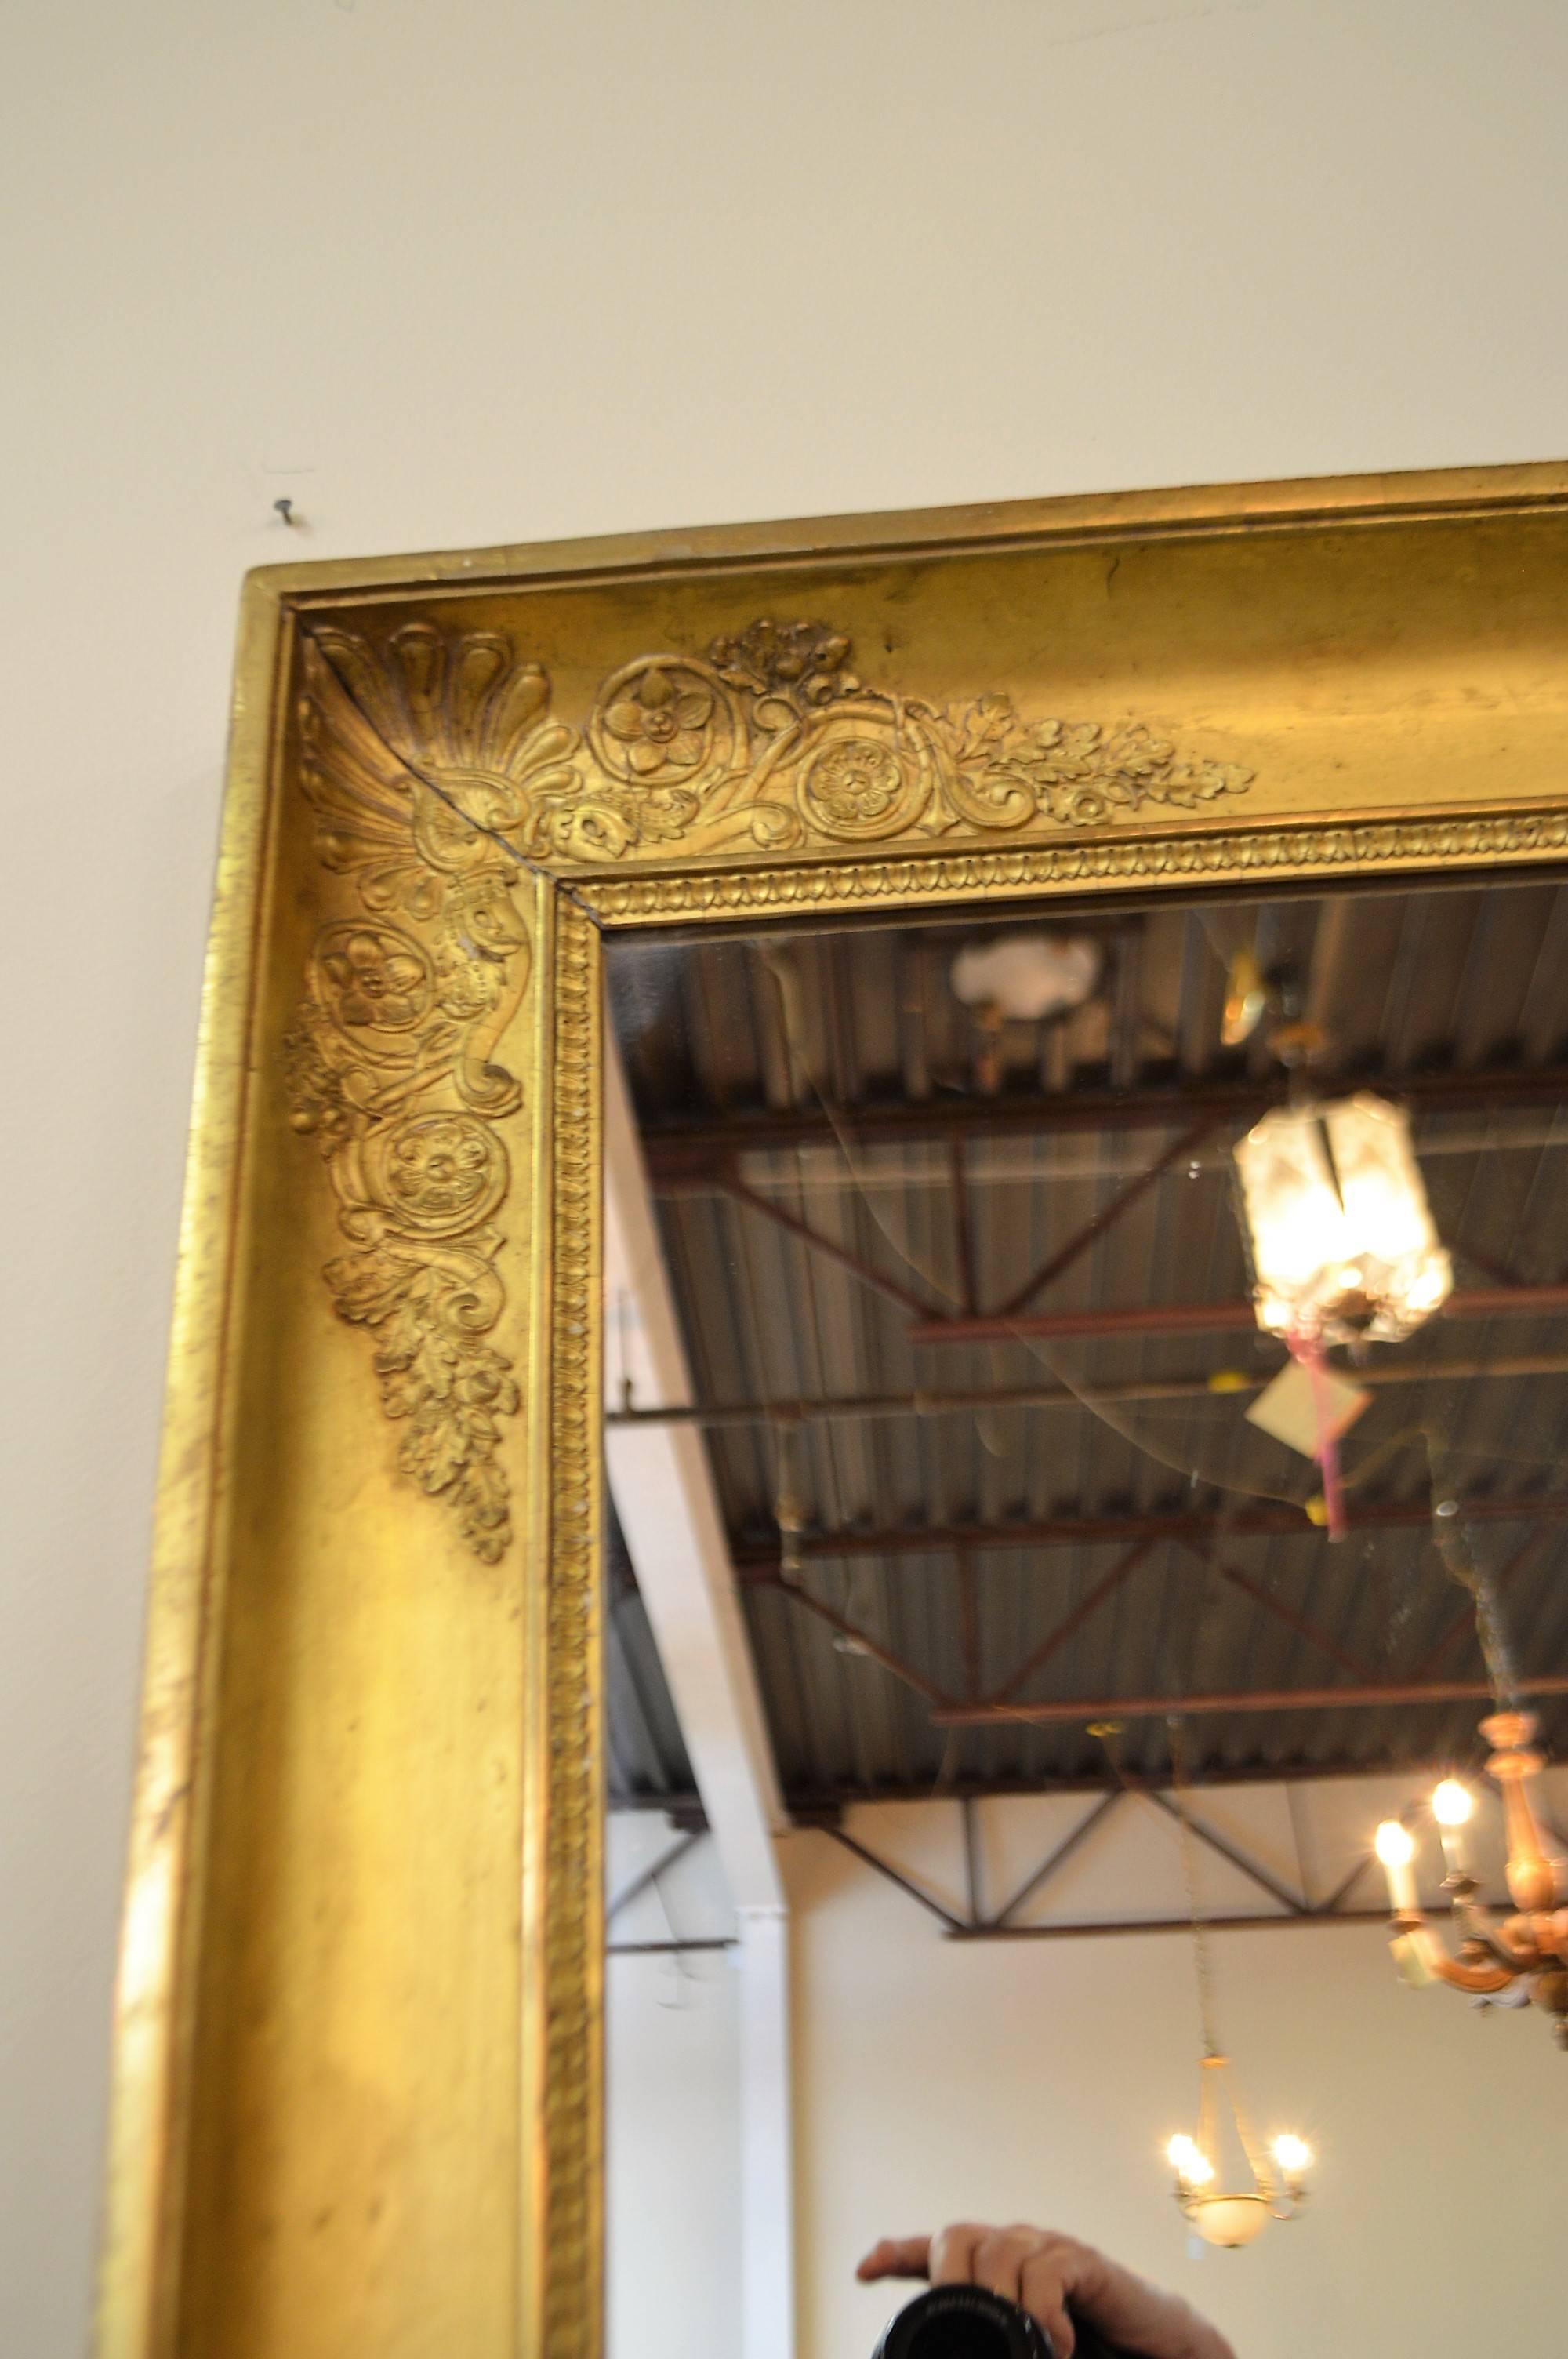 Mid-19th century Directoire style gold leaf mirror, will fit many decor, simple and elegant with only palm leaf decor on each corner.